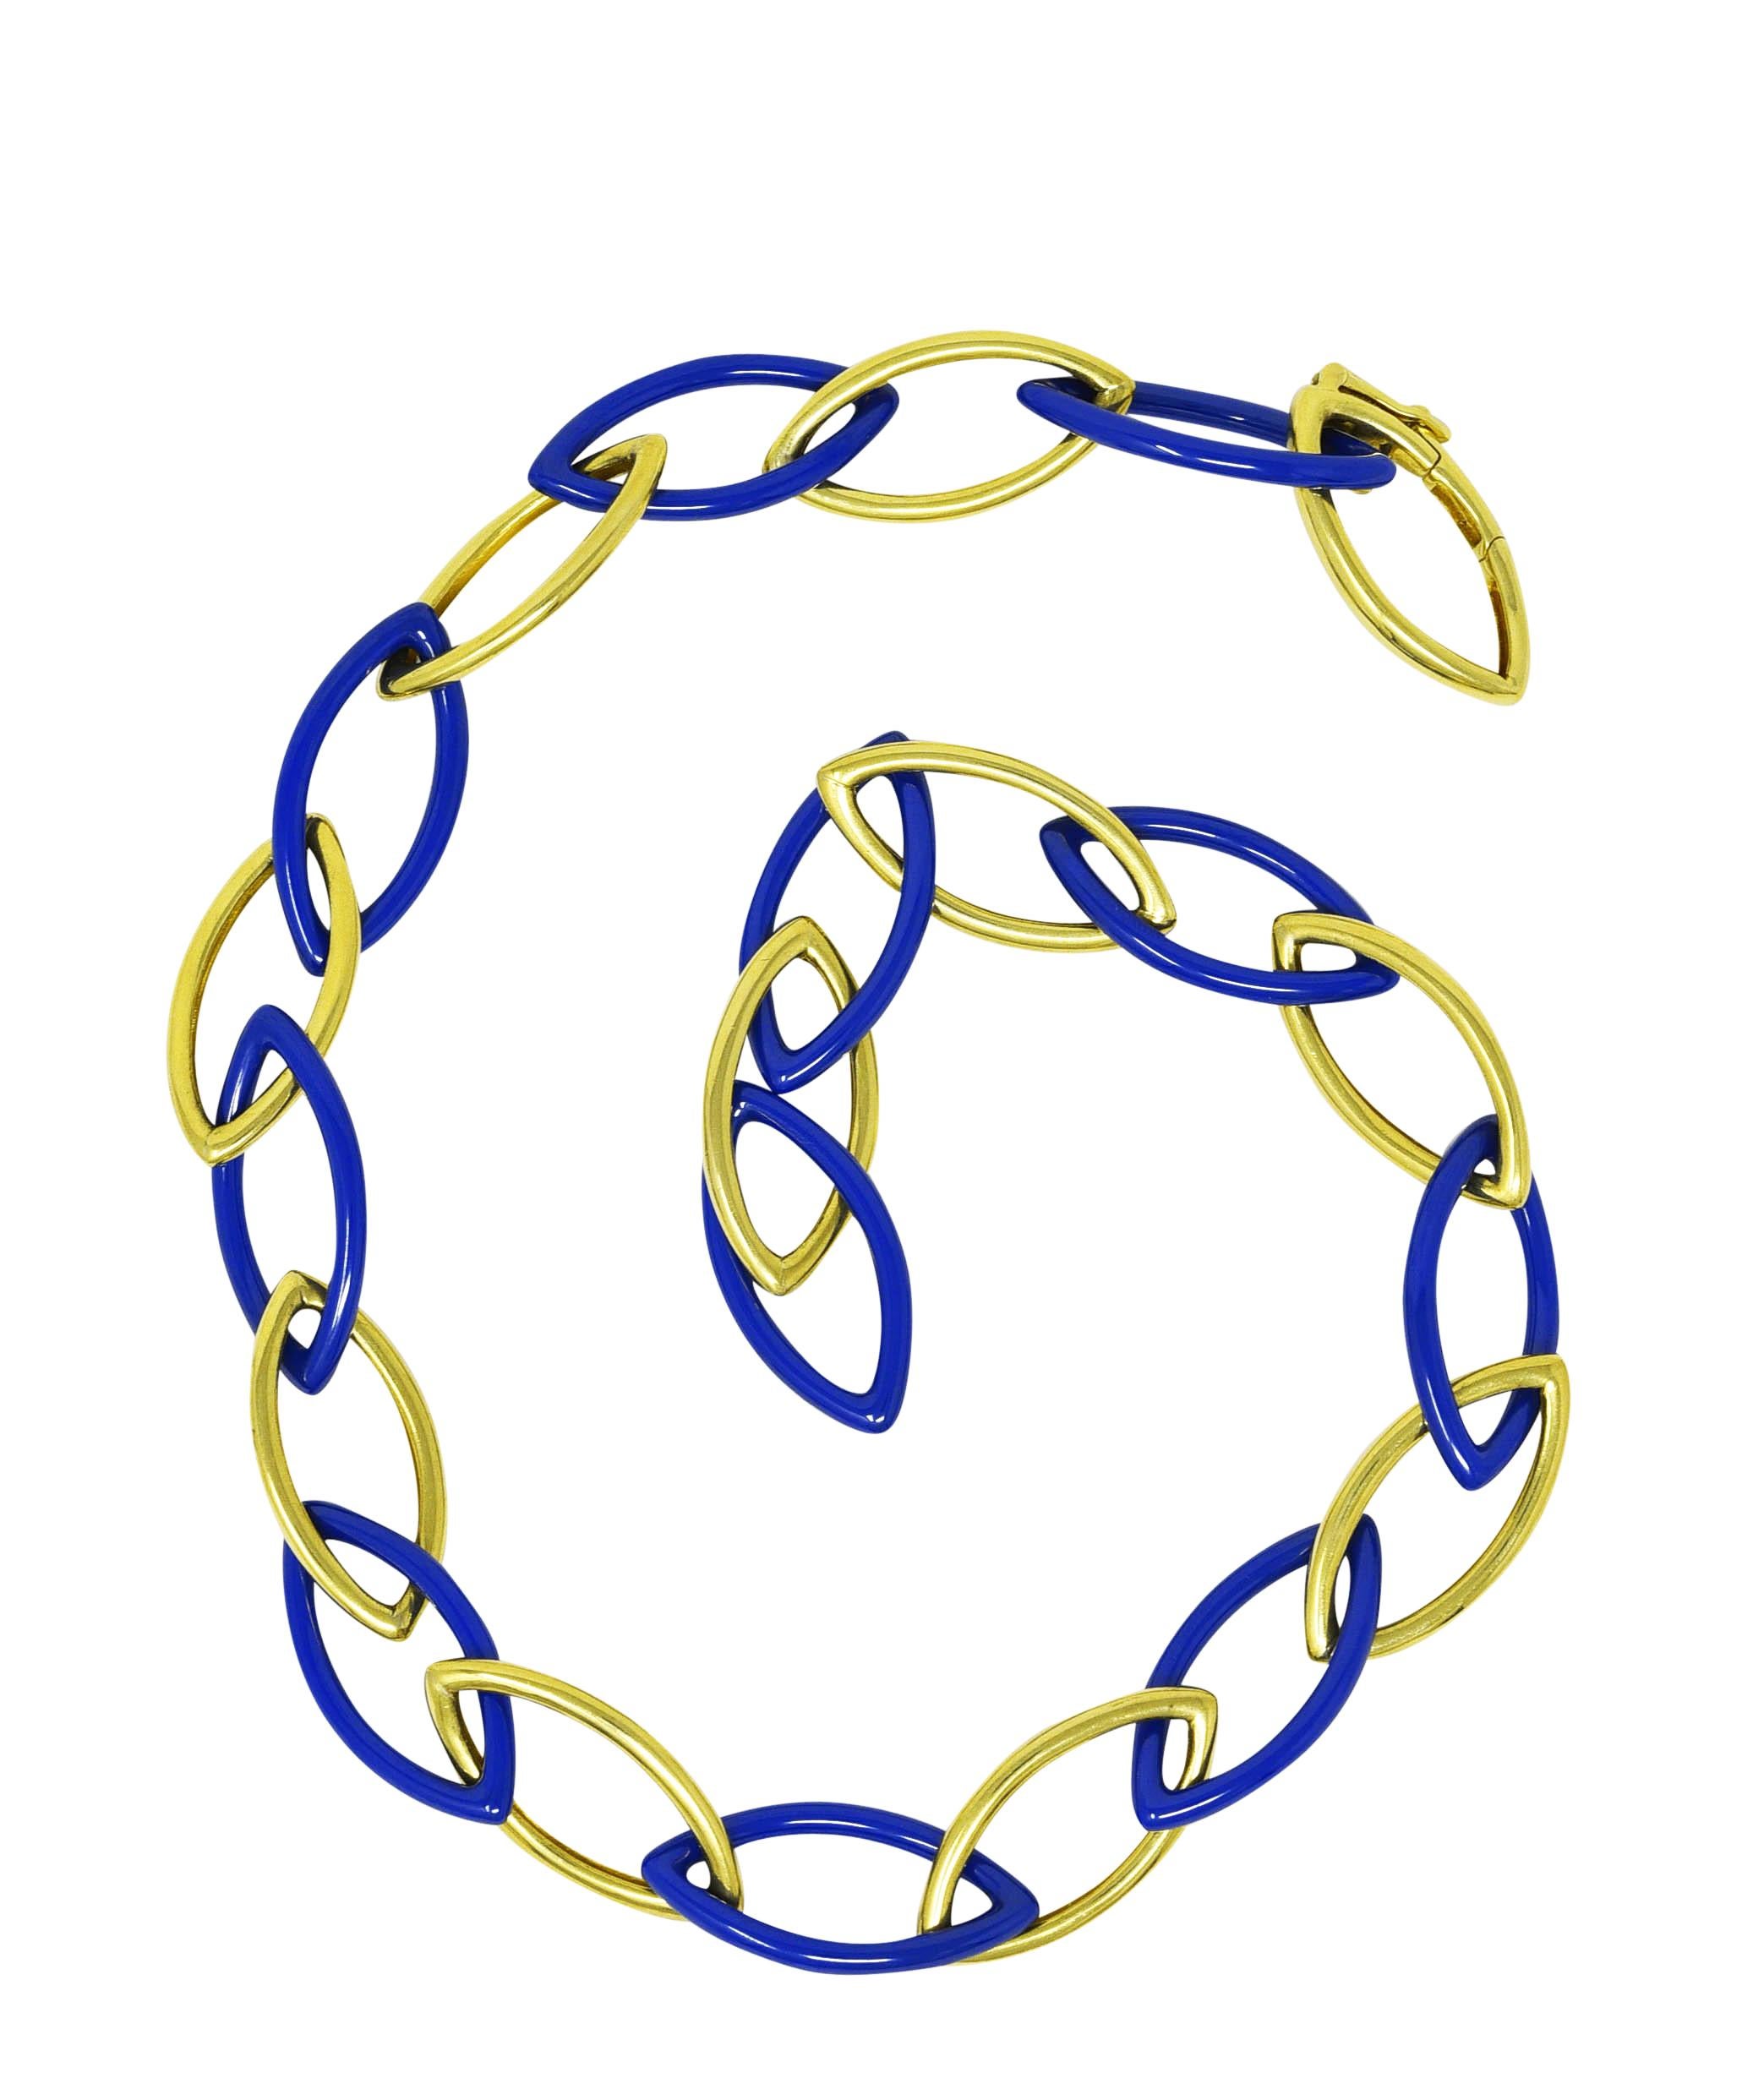 Necklace is designed as alternating blue ceramic and gold marquise shaped links. Ceramic links are deeply saturated ultramarine blue with a gloss finish. Featuring high polished gold finish. Completed by hidden clasp closure with figure eight